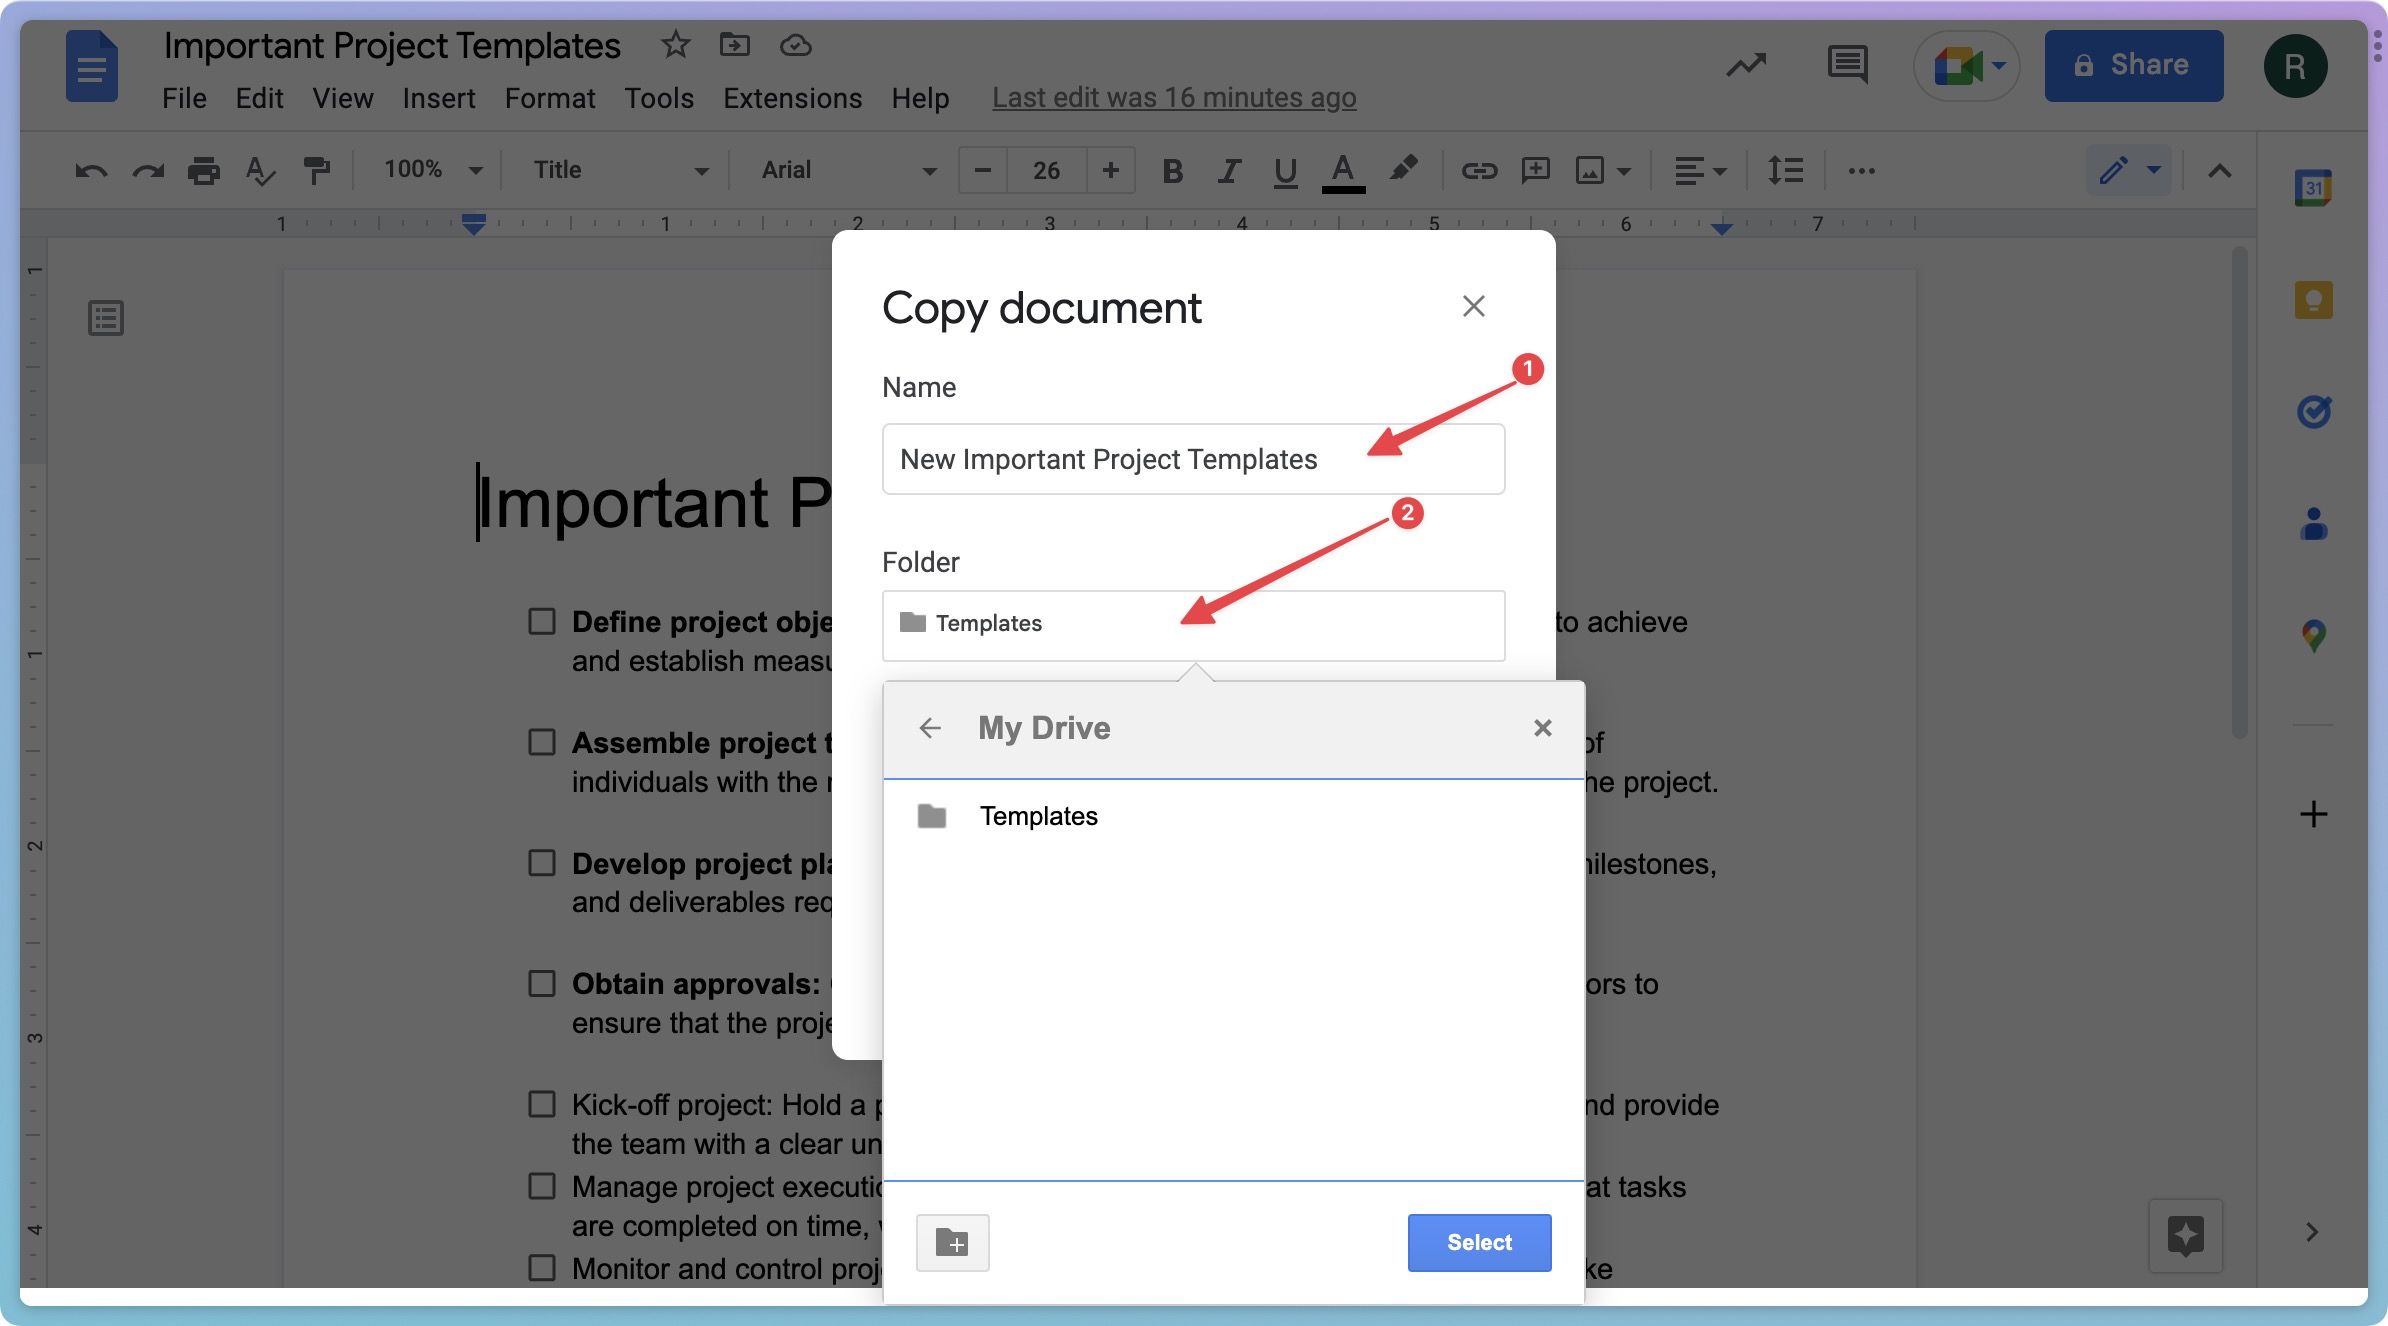 Screenshot showing the Copy document action interface